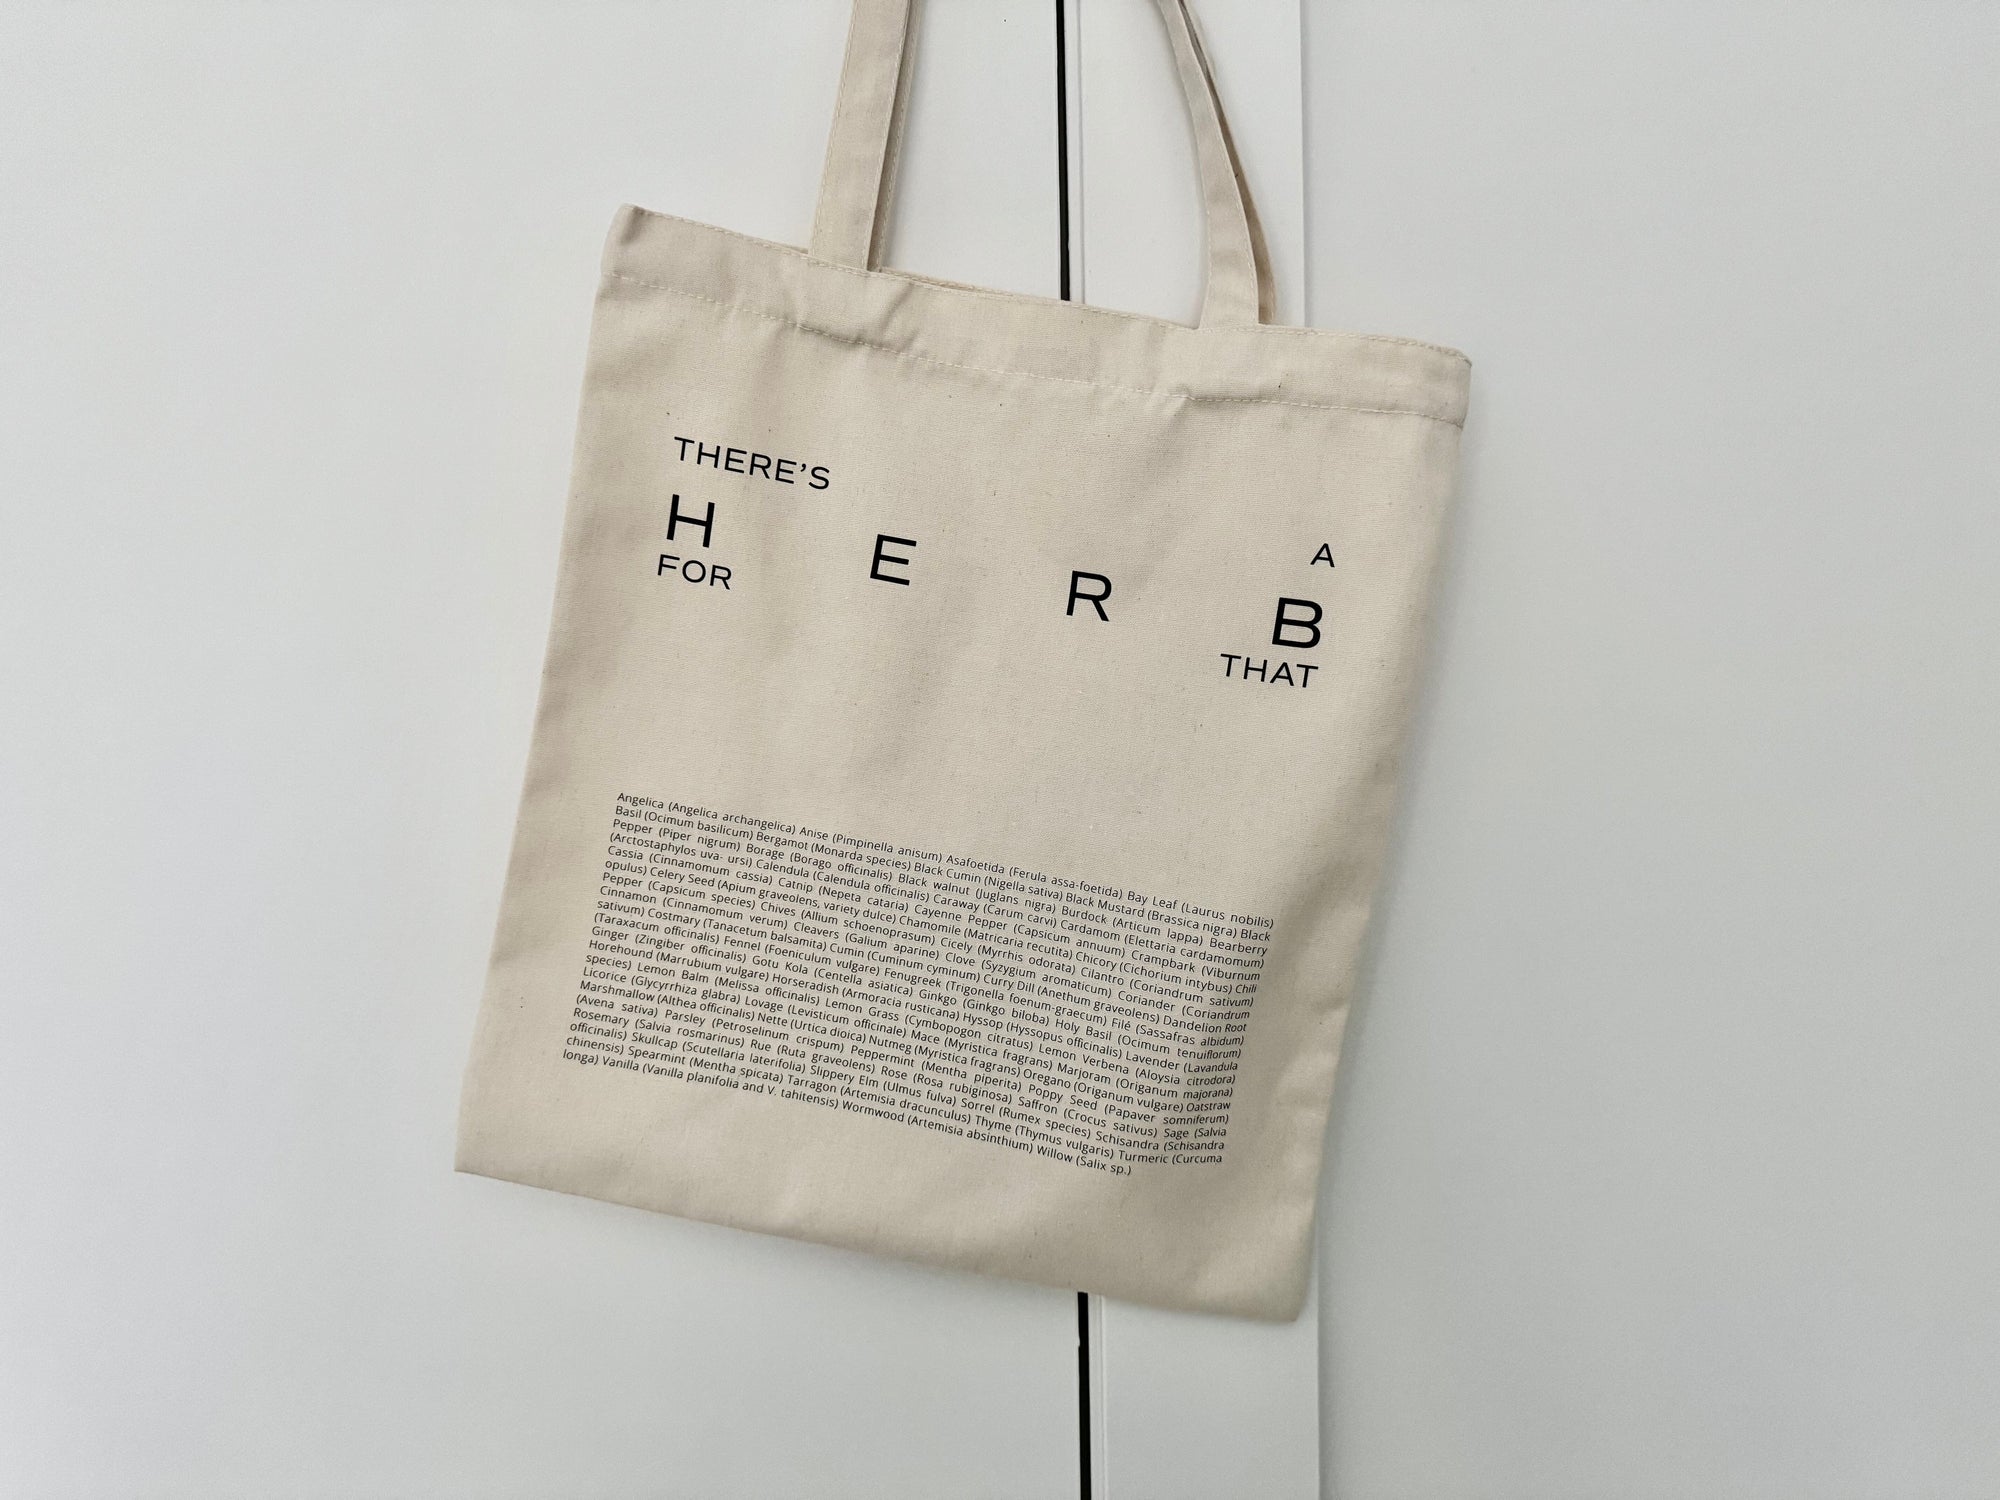 Tote bag hanging on a door saying "there's an herb for that"